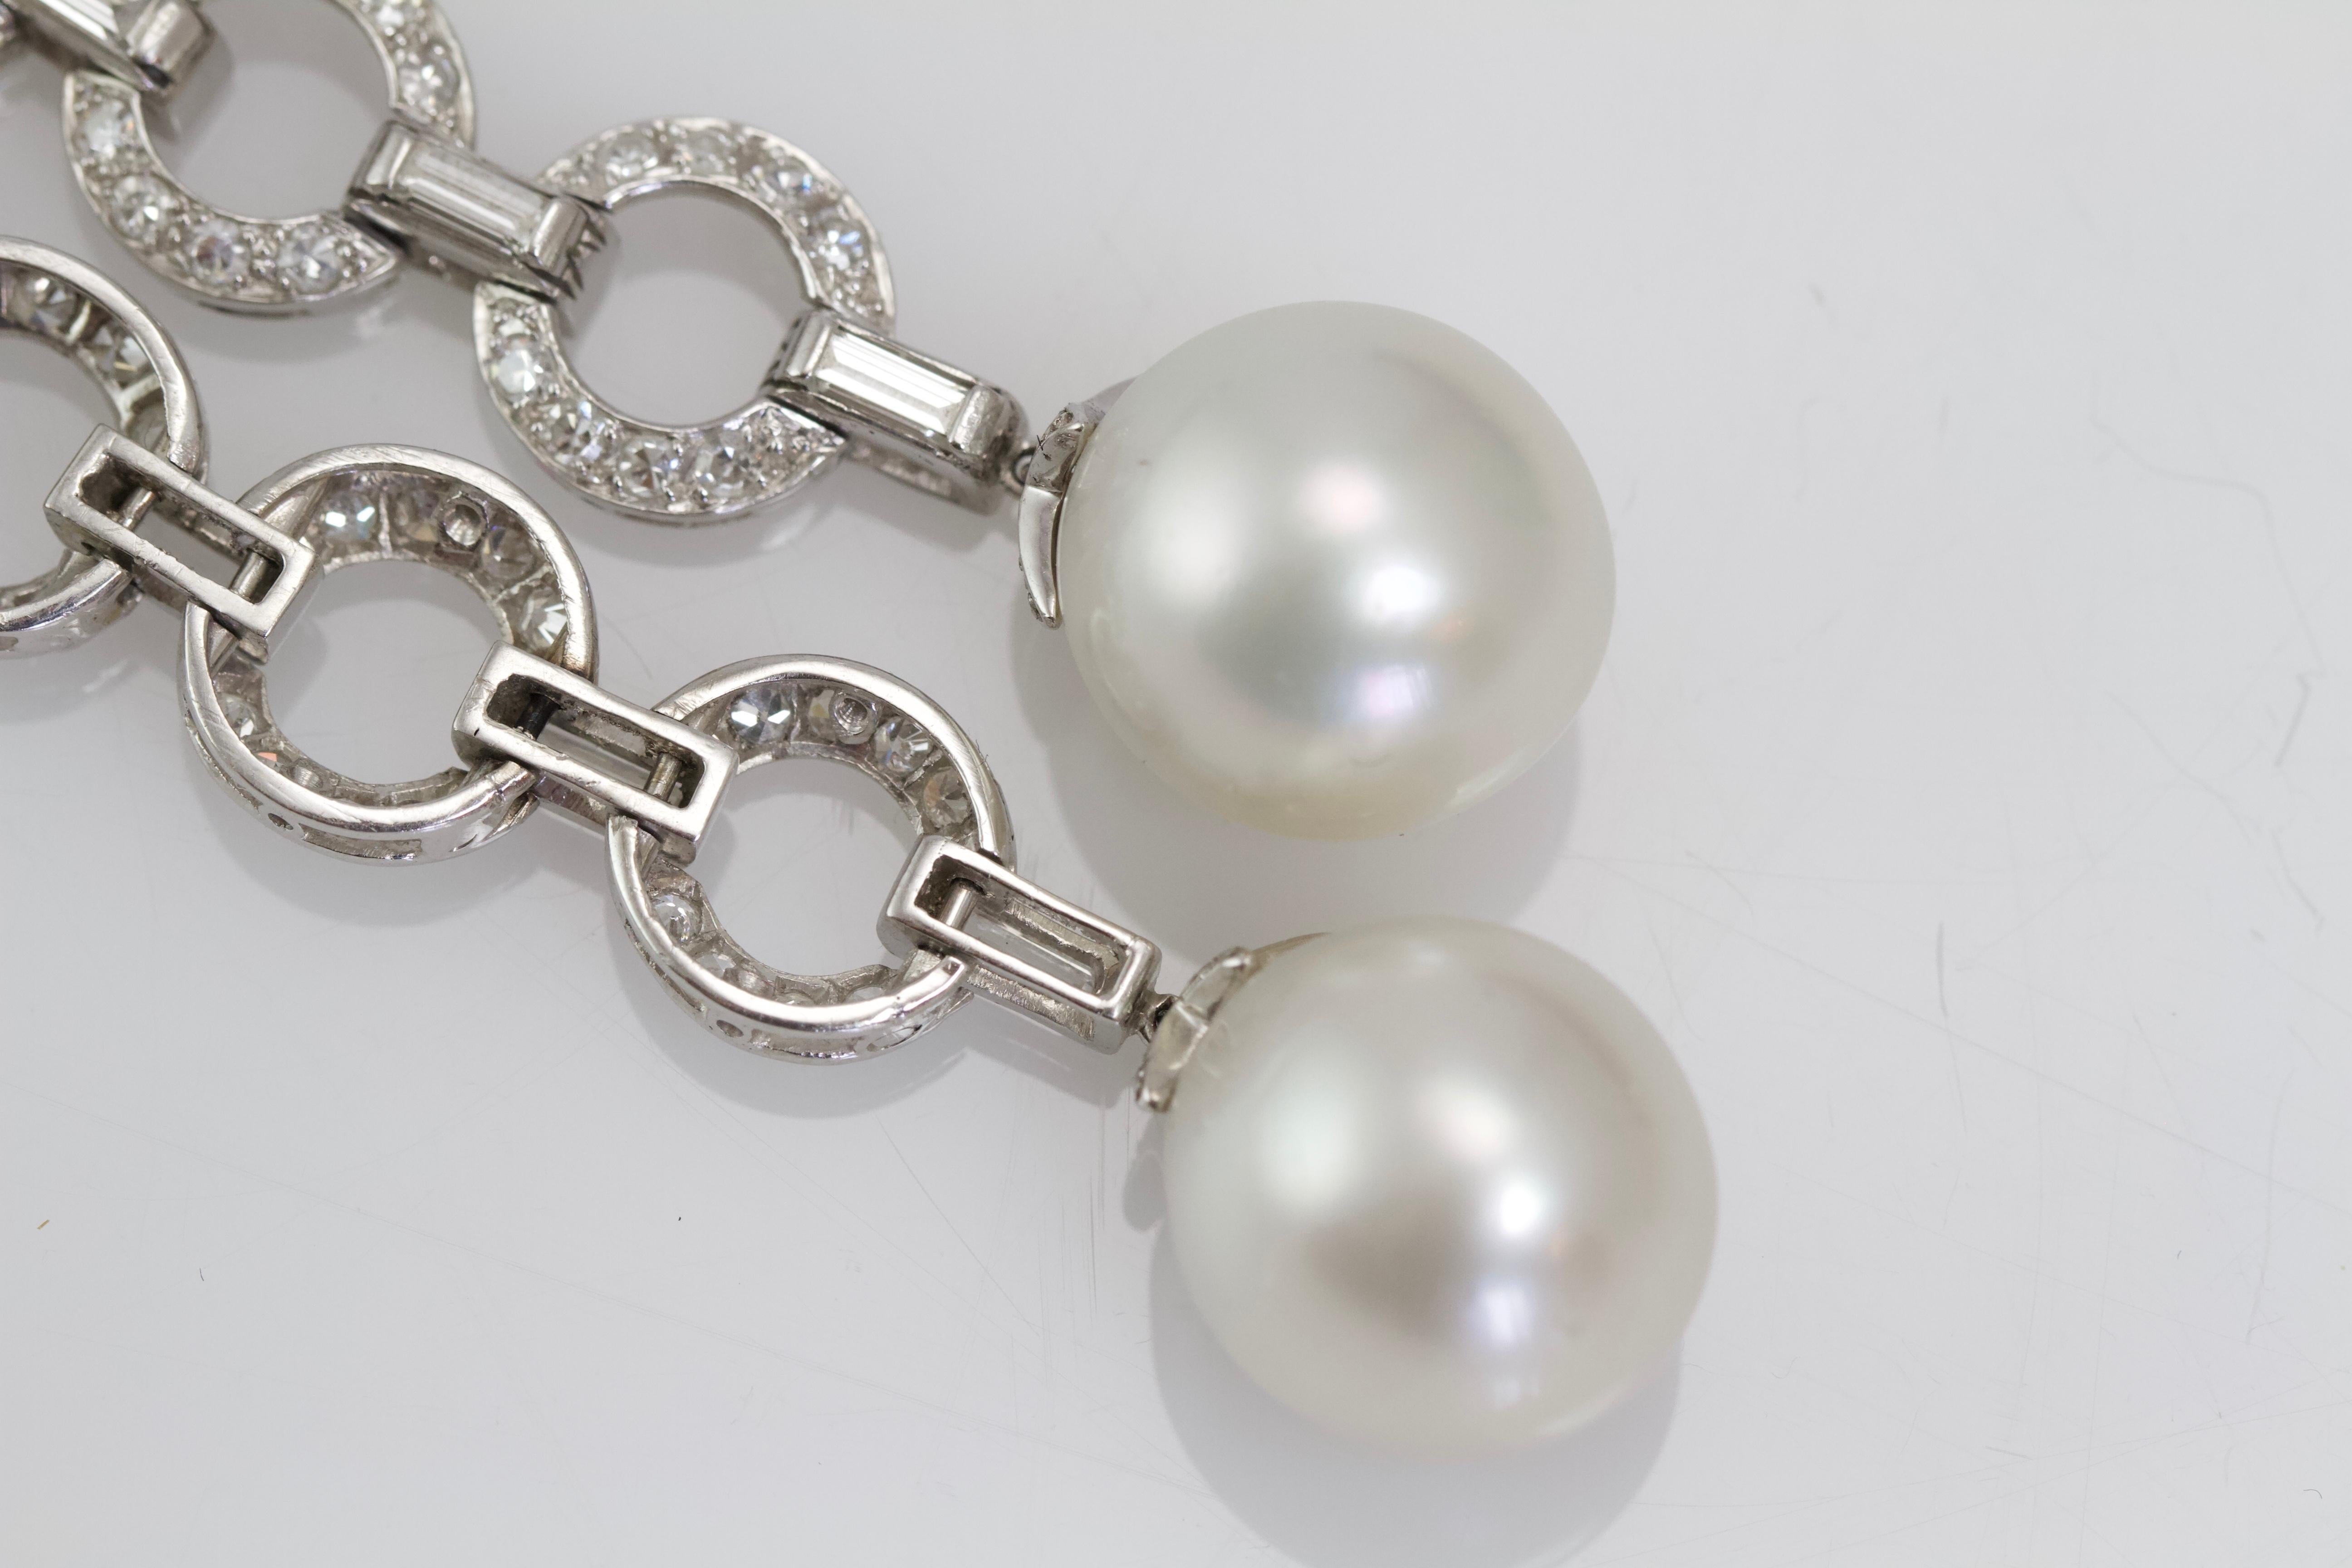 Art Deco Diamond and Cultured-Pearl Earrings from Paris, 1925 For Sale 5